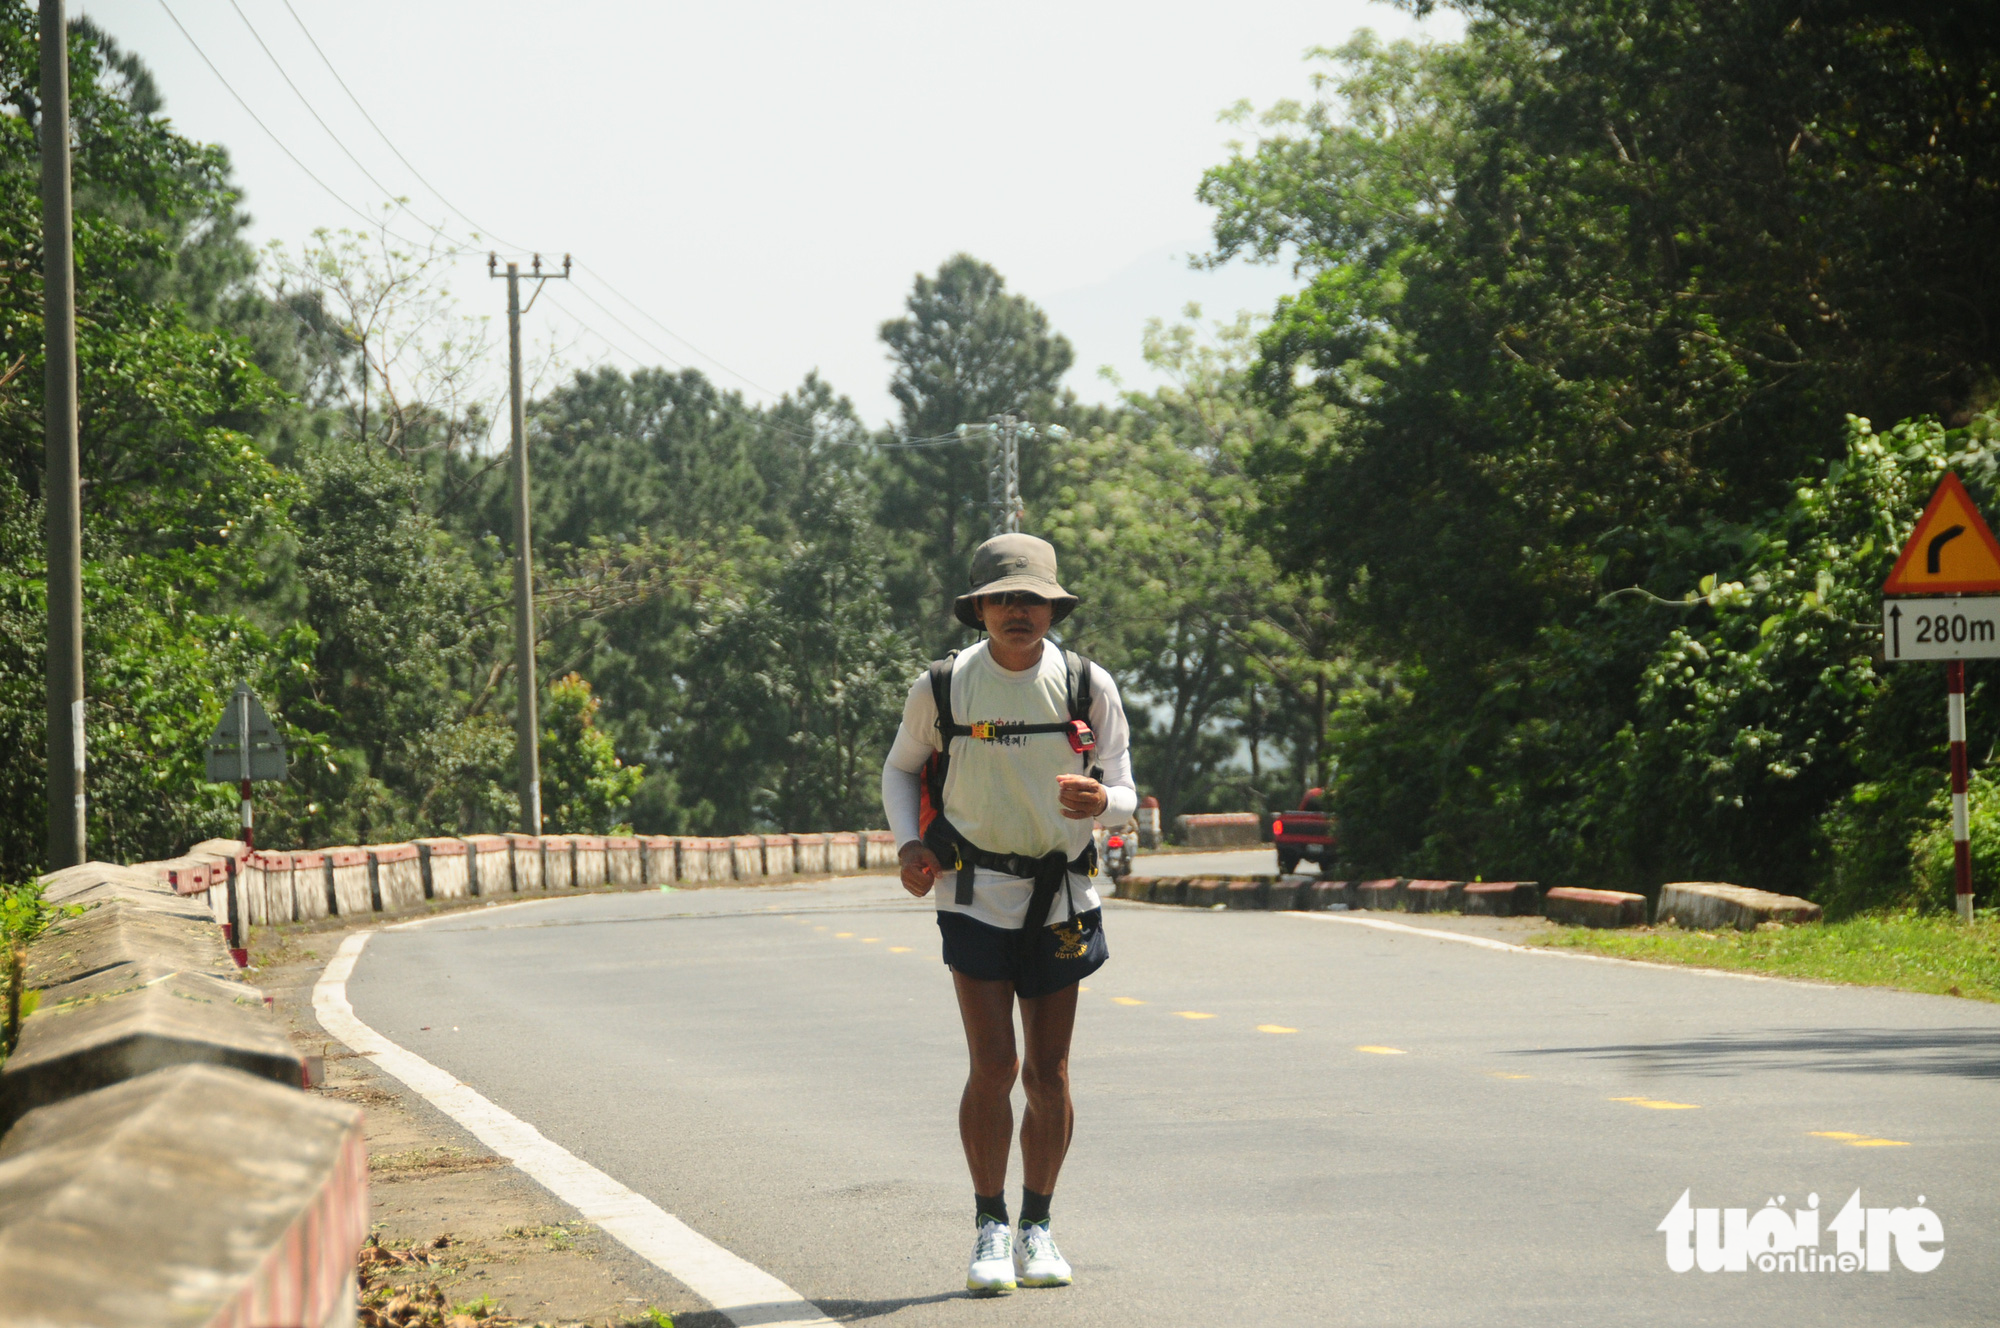 An inspiring encounter between two runners from South Korea and Vietnam